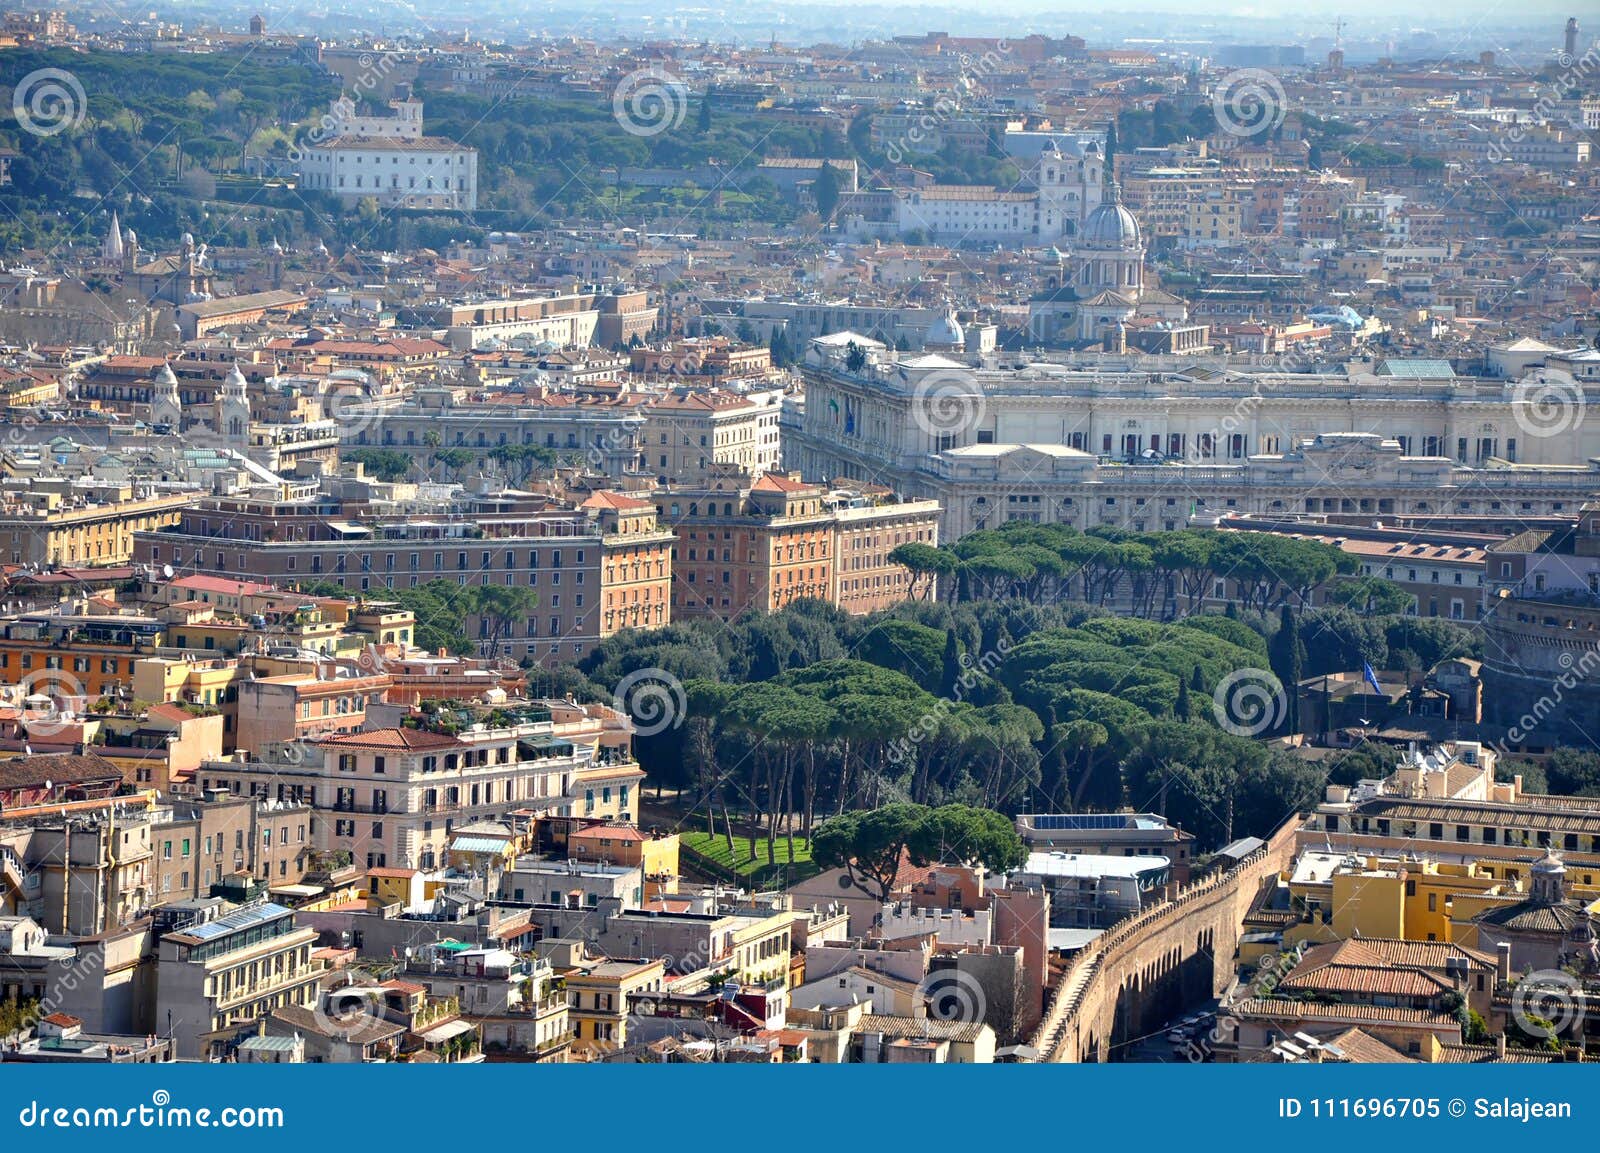 Aerial Drone View of Rome City, Italy Stock Image - Image famous, heritage: 111696705